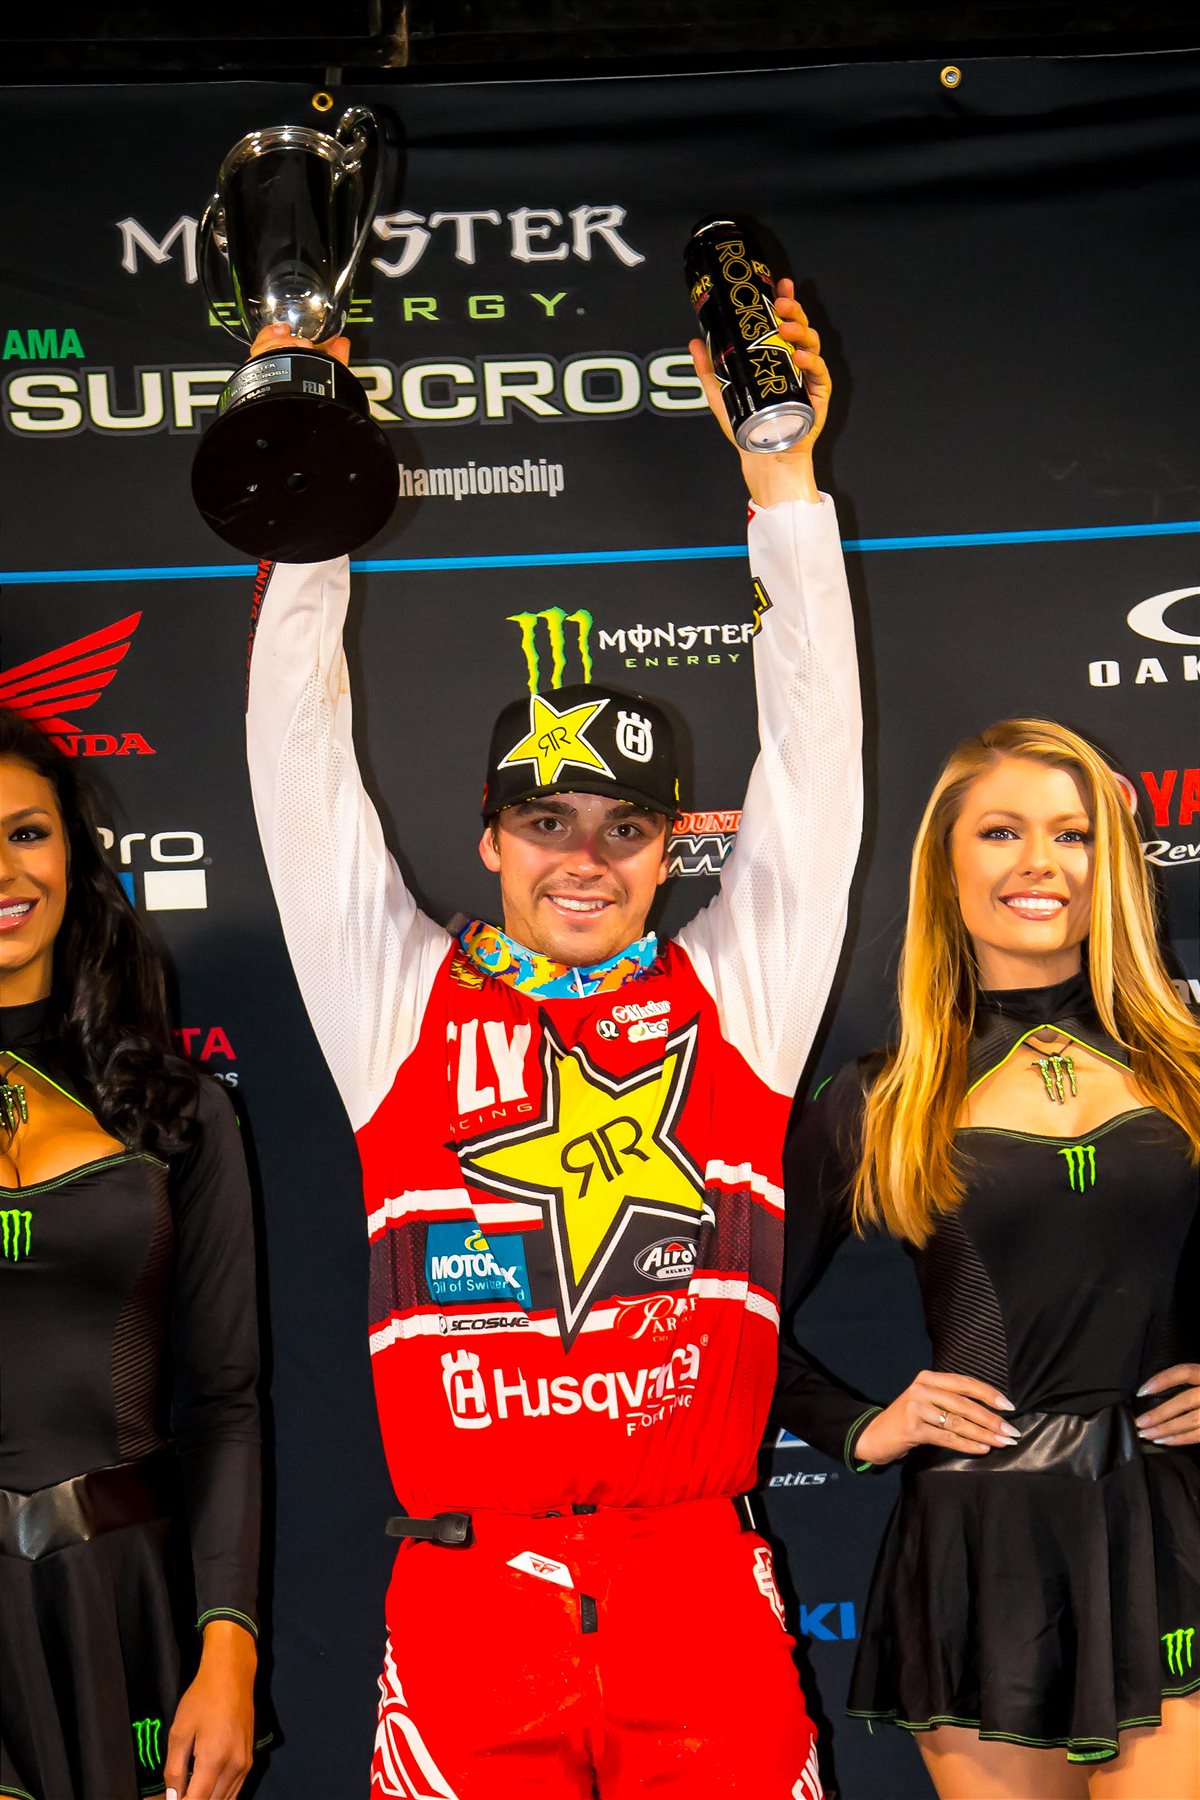 Zach Osborne claimed another win on Saturday at St. Louis SX! (Photo: Simon Cudby)